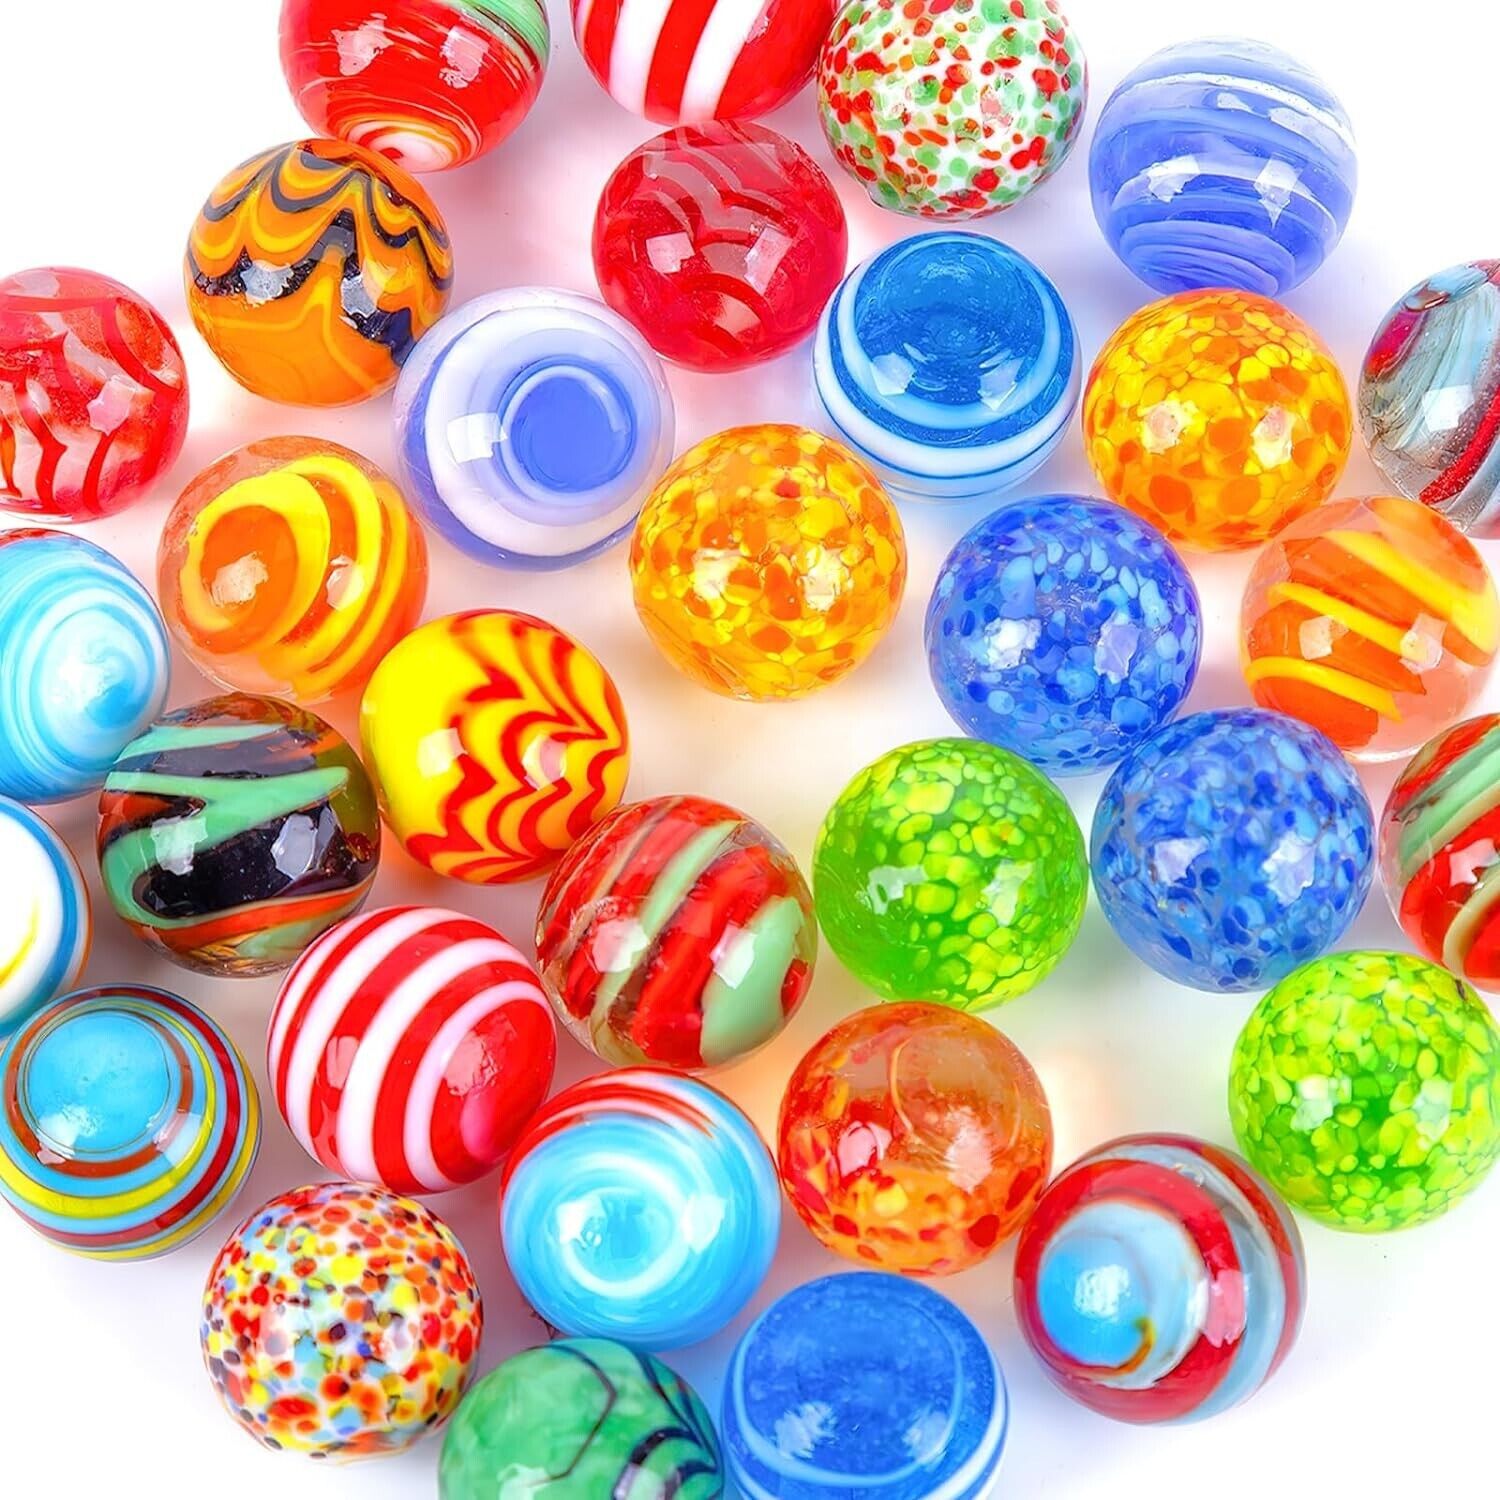 32PCS Glass Marbles Bulk 16mm/0.6inch Handmade Glass Marbles Colorful